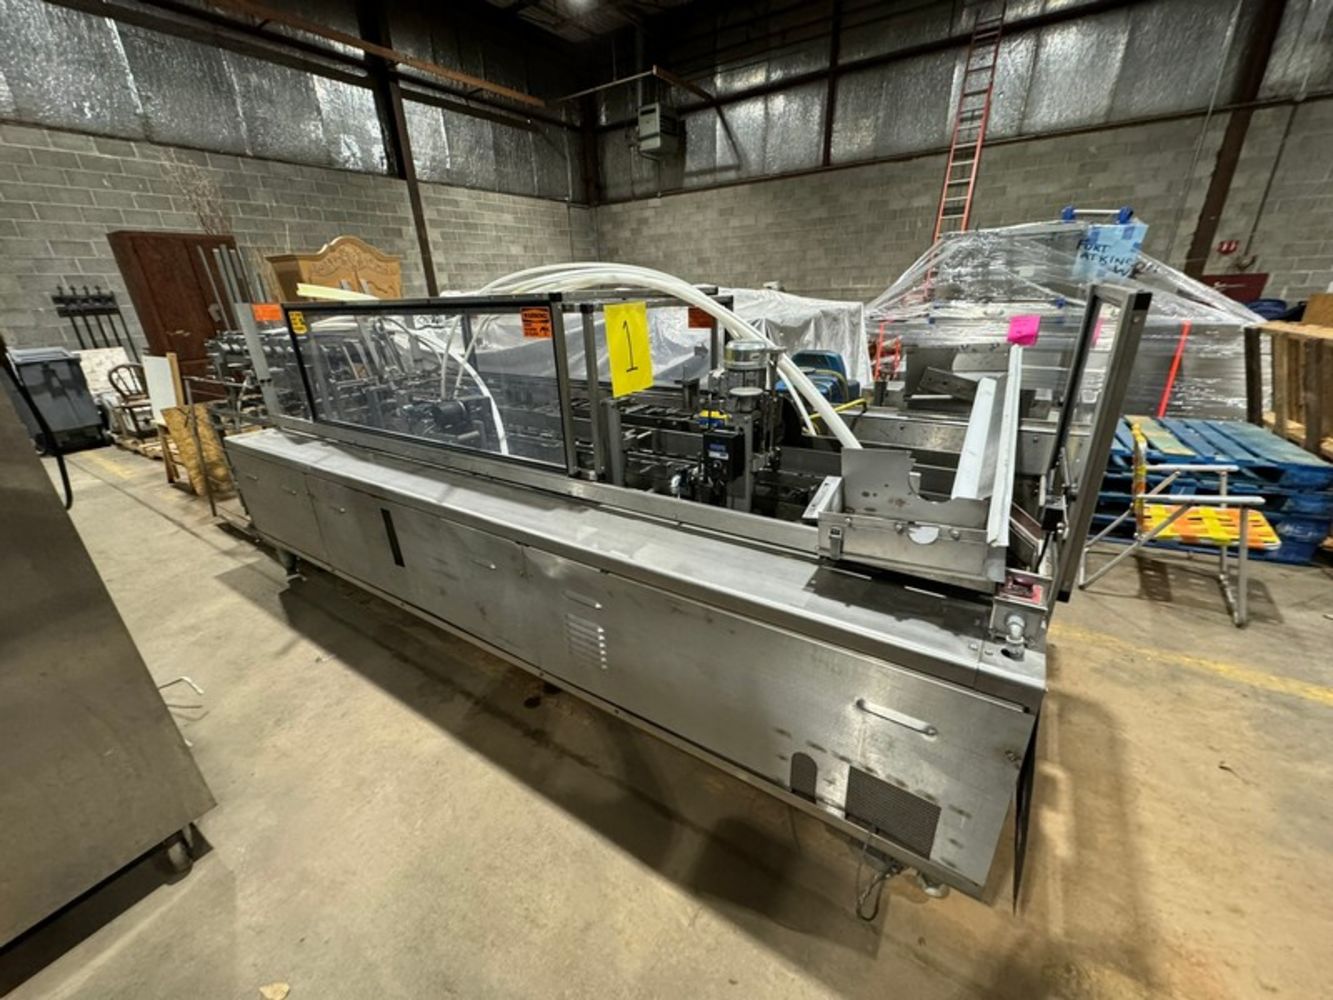 Multi-Location Food and Beverage Equipment Auction - Contact M Davis Group to Consign YOUR Equipment